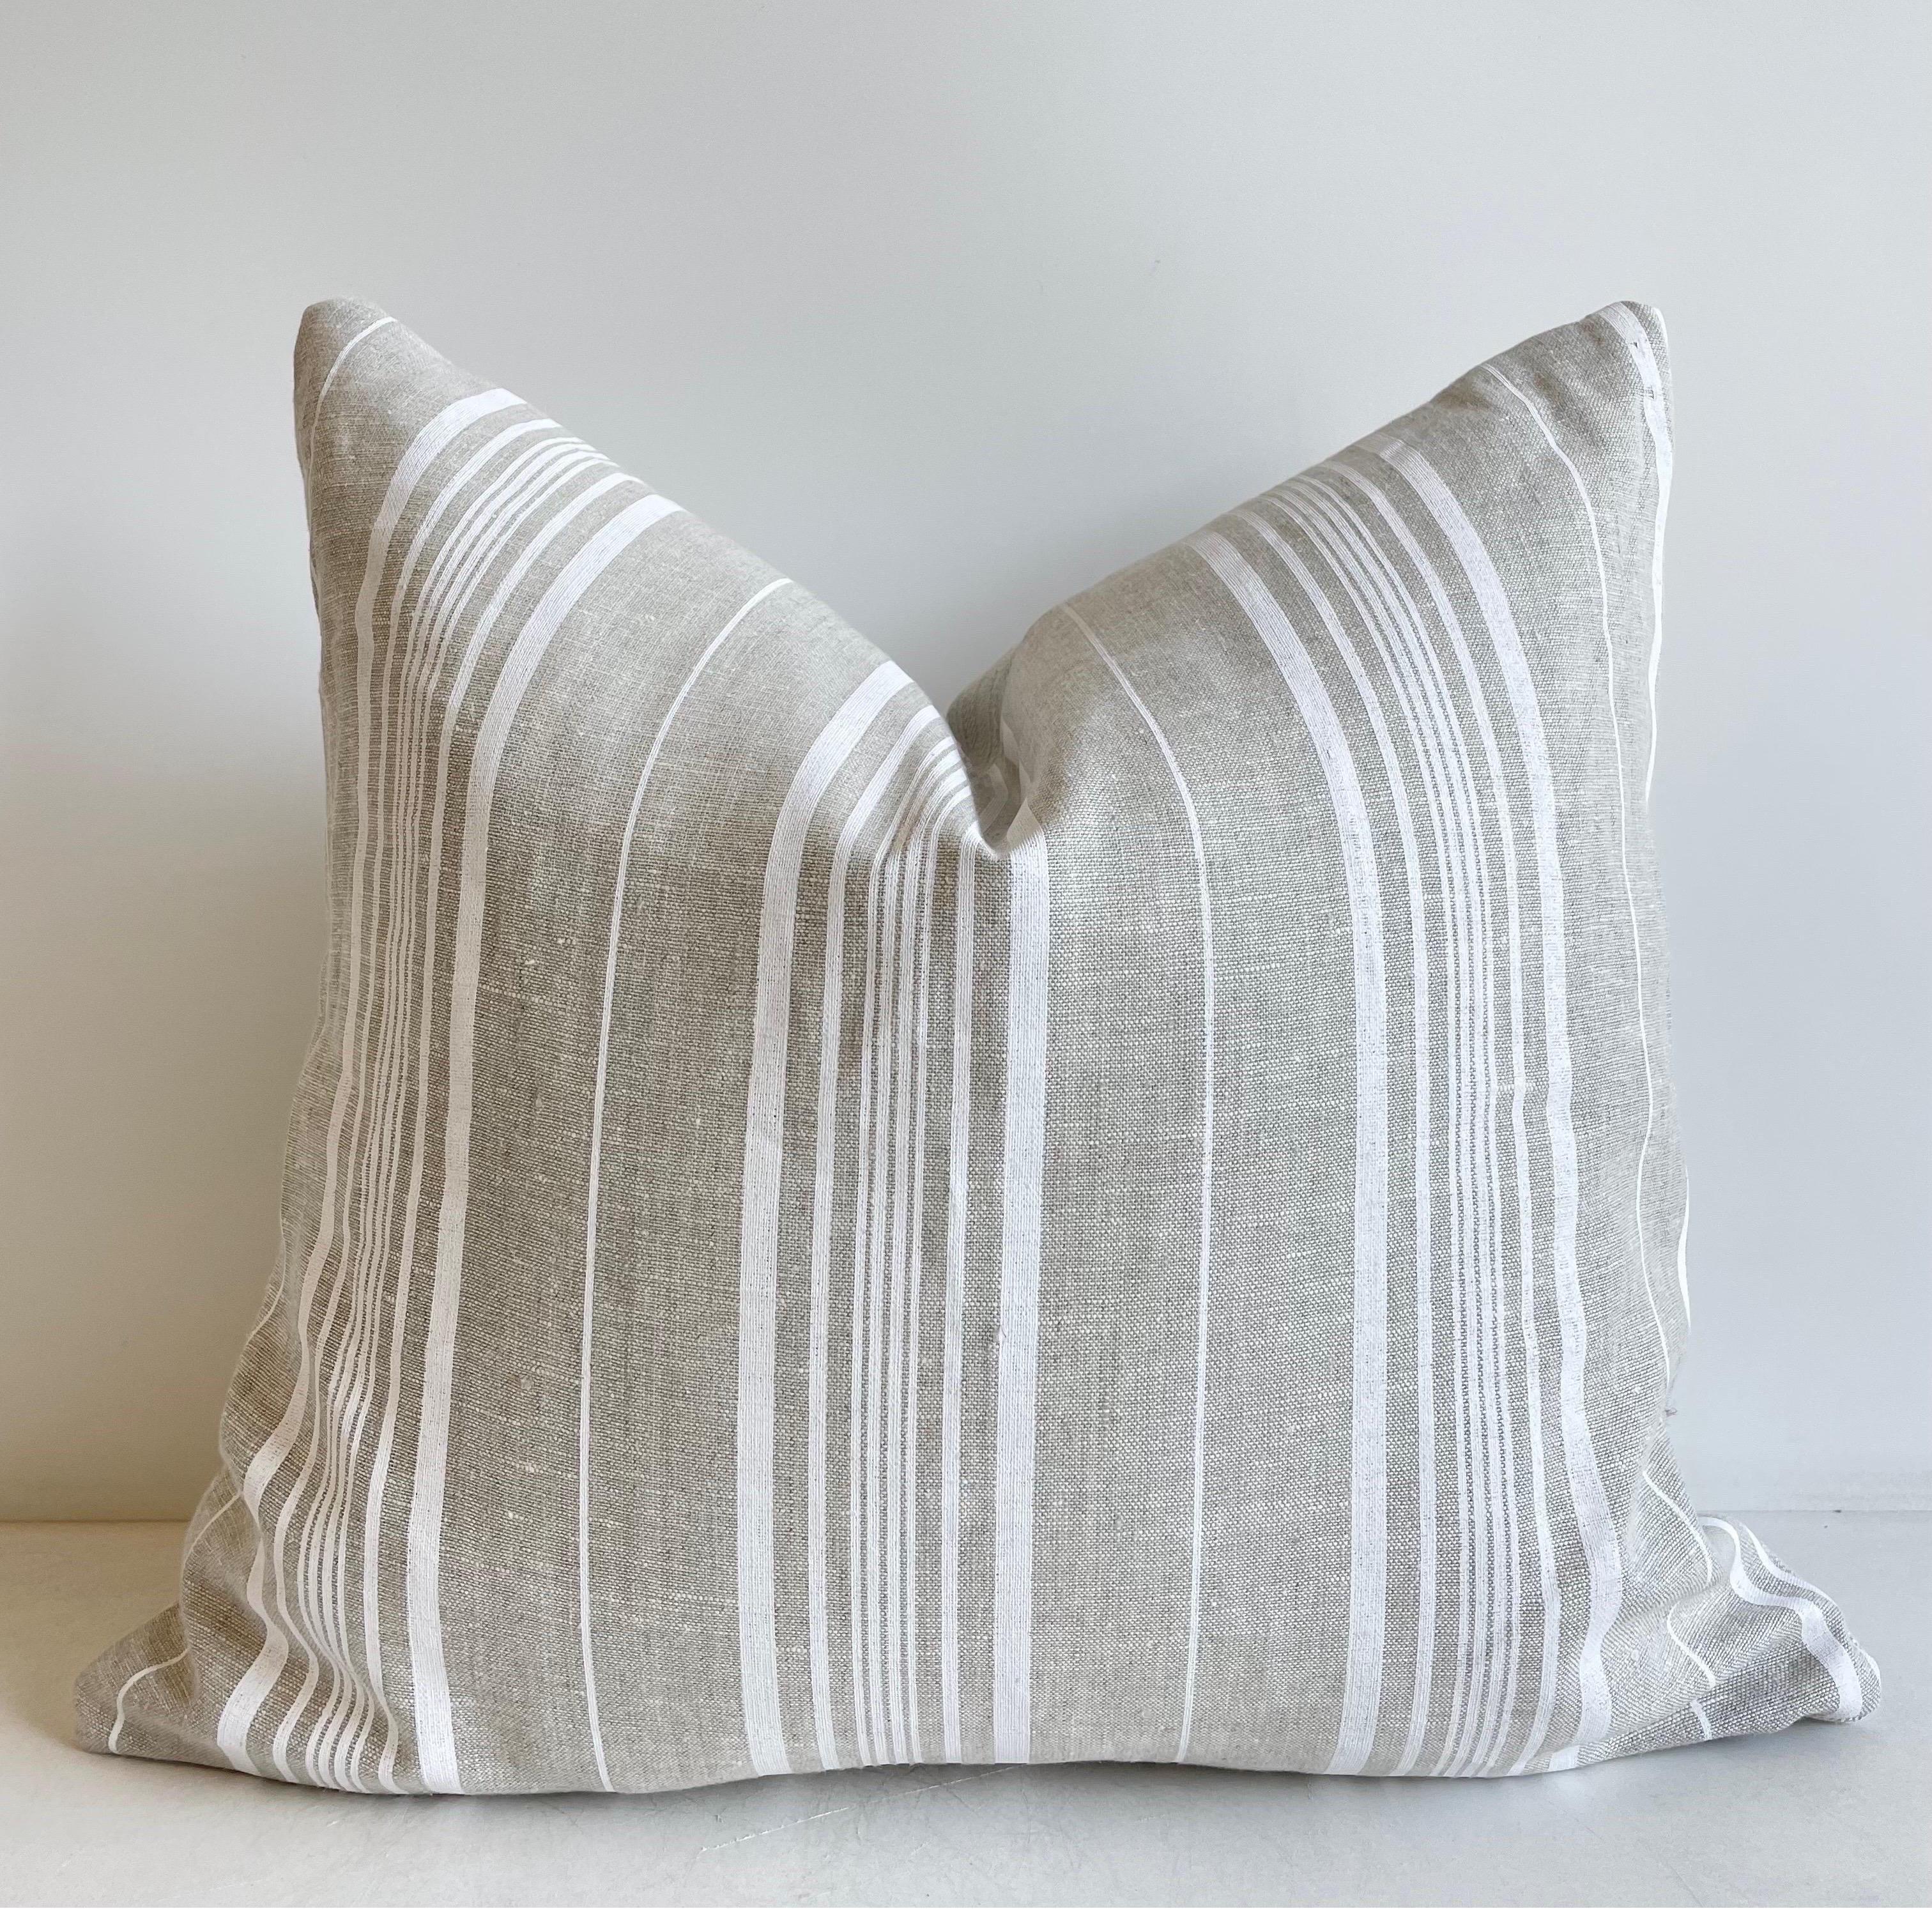 Antique grain sack pillow.
Lovely grain feed sack pillows from Europe. We custom-made these out of the original antique feed sacks, with brass zipper closure and overlocked edges. The backs French linen ticking stripes. All items have been pre